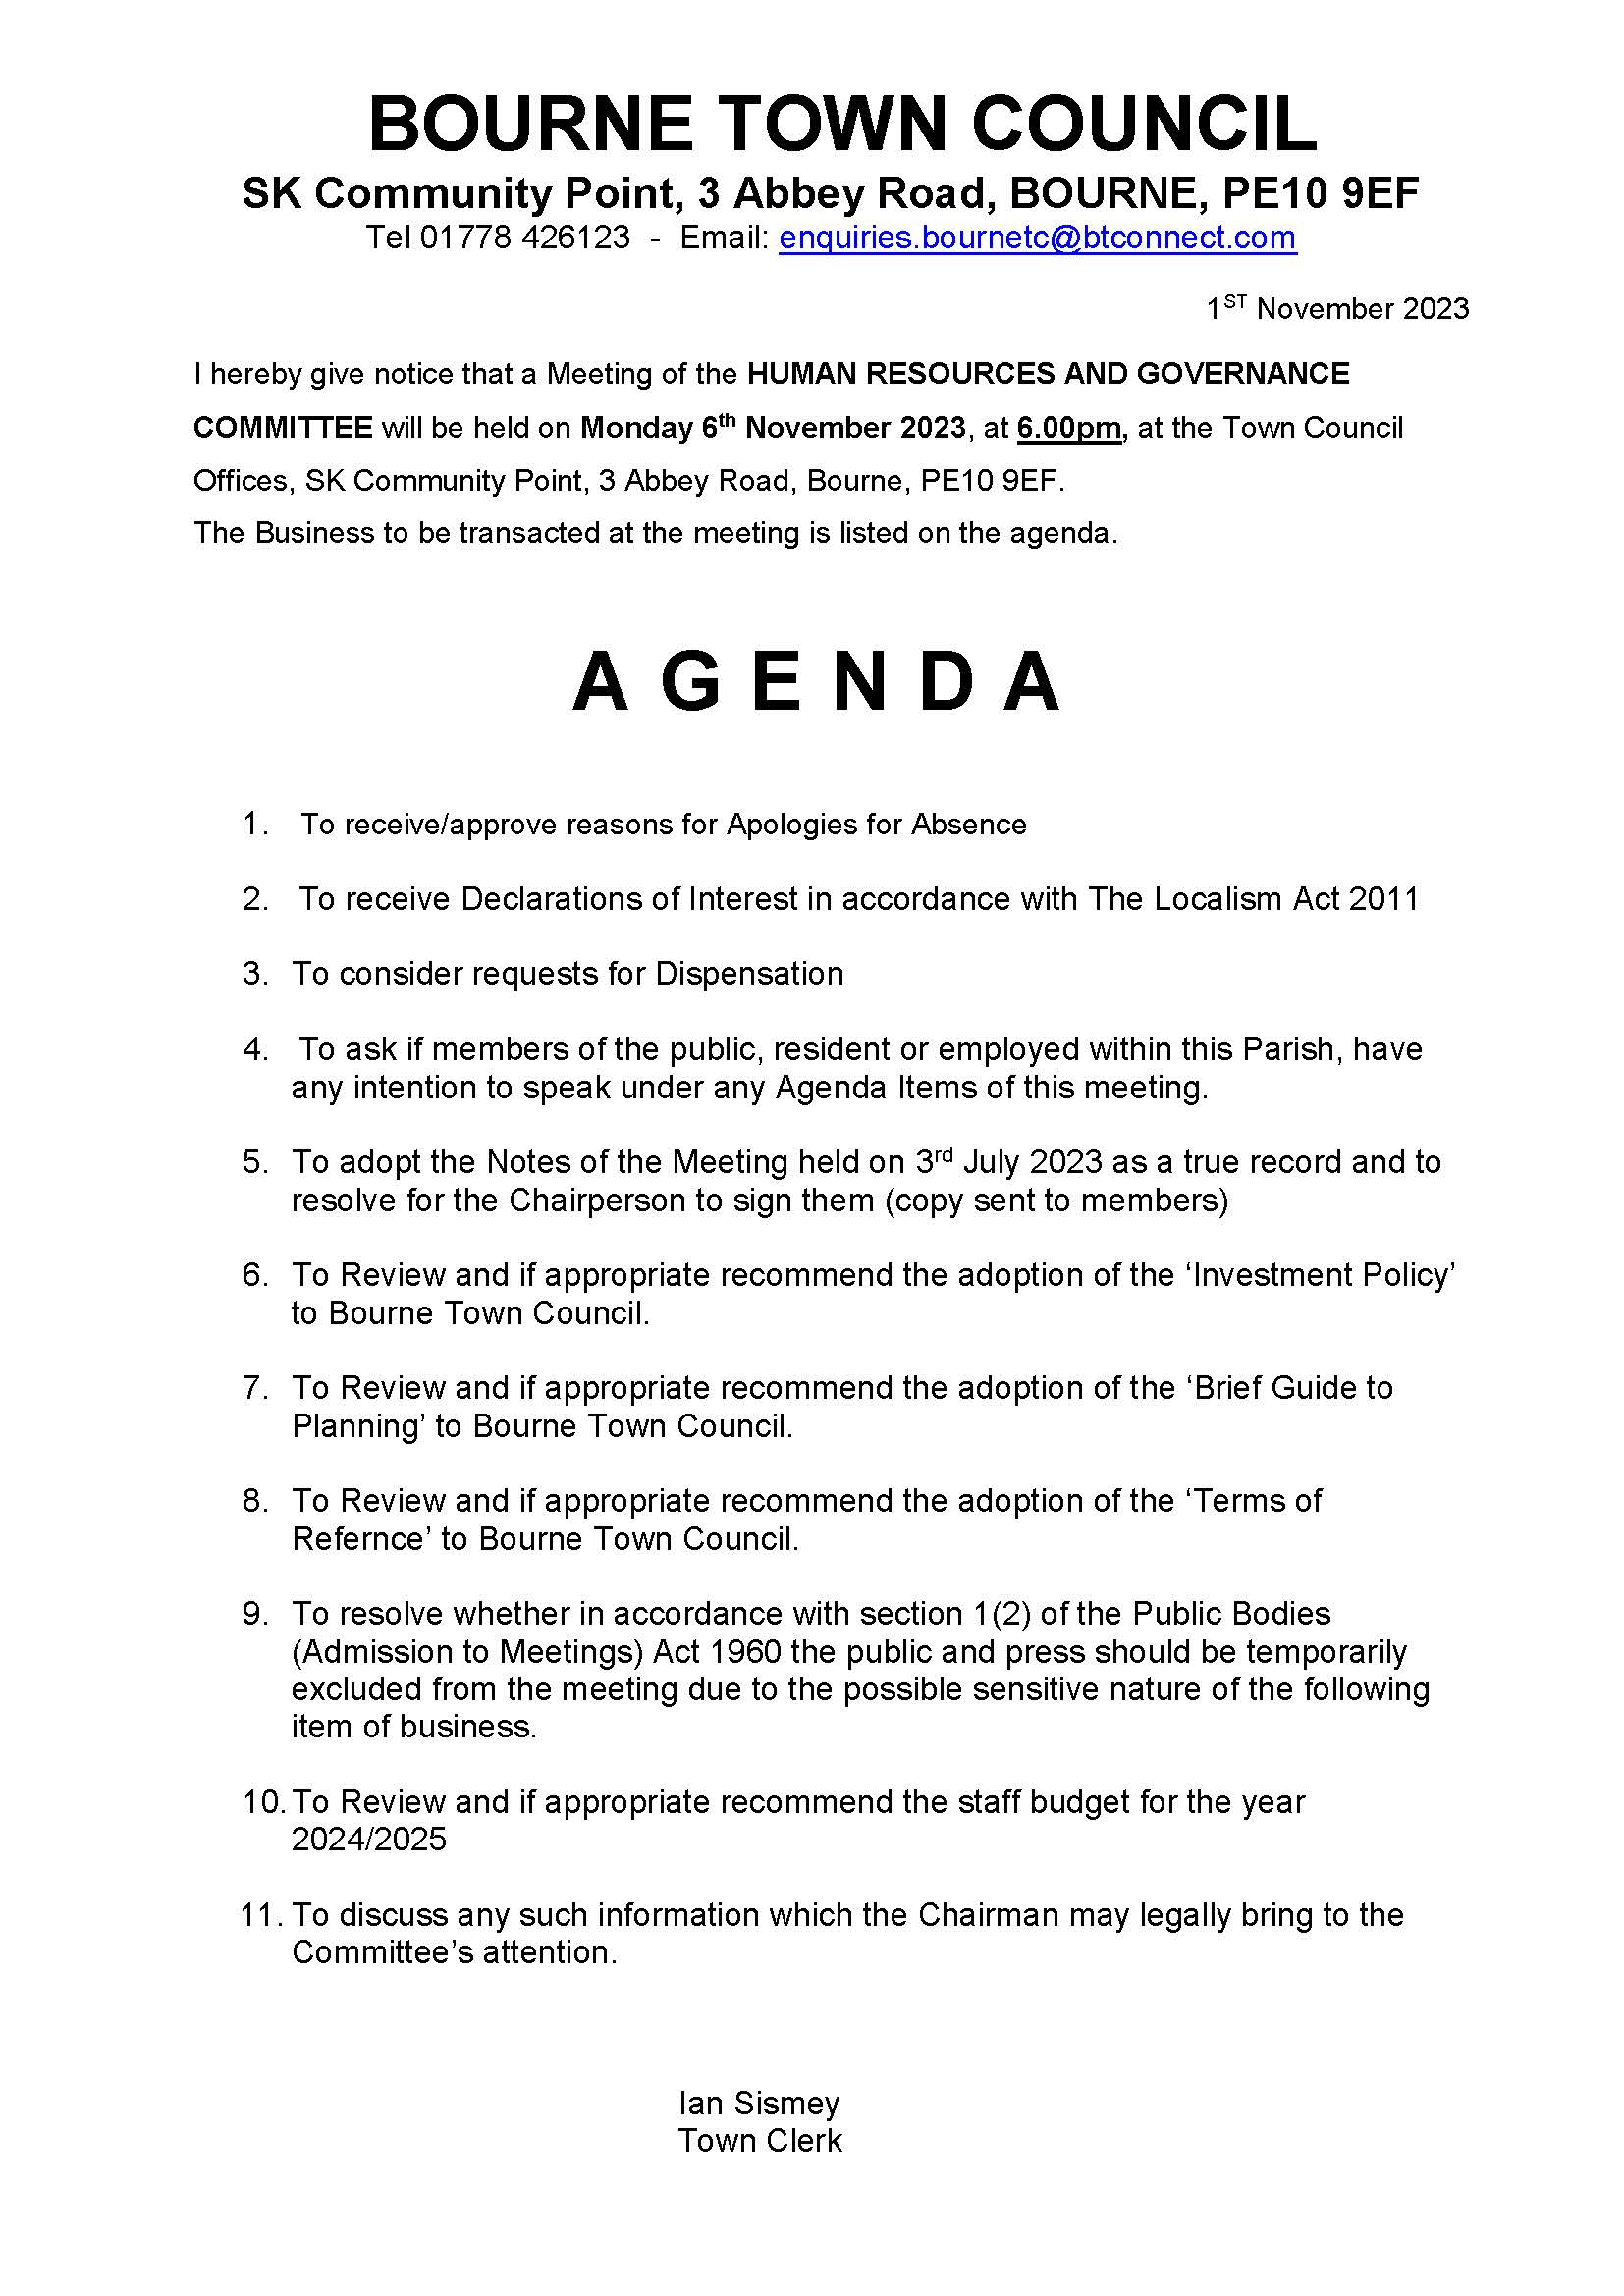 Notice and Agenda - Human Resources and Governance Committee Meeting 06/11/2023